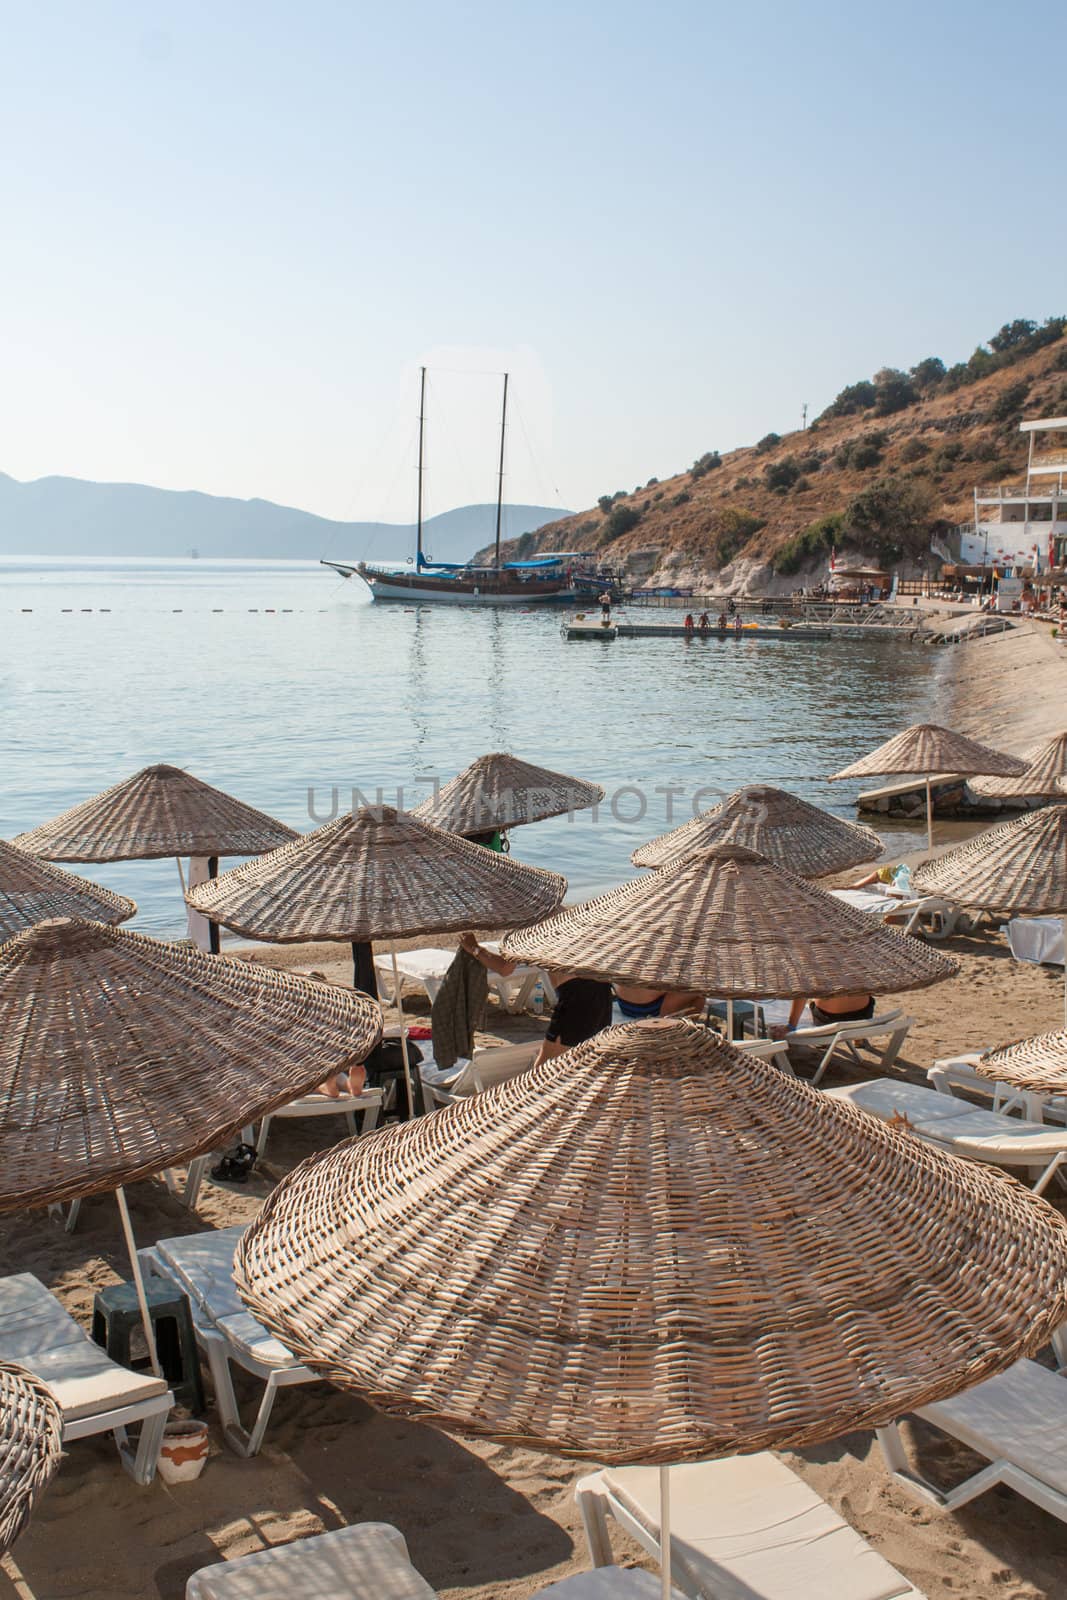 Bardakci Bay Beach in Bodrum, Turkey, with wicker parasols and white loungers.